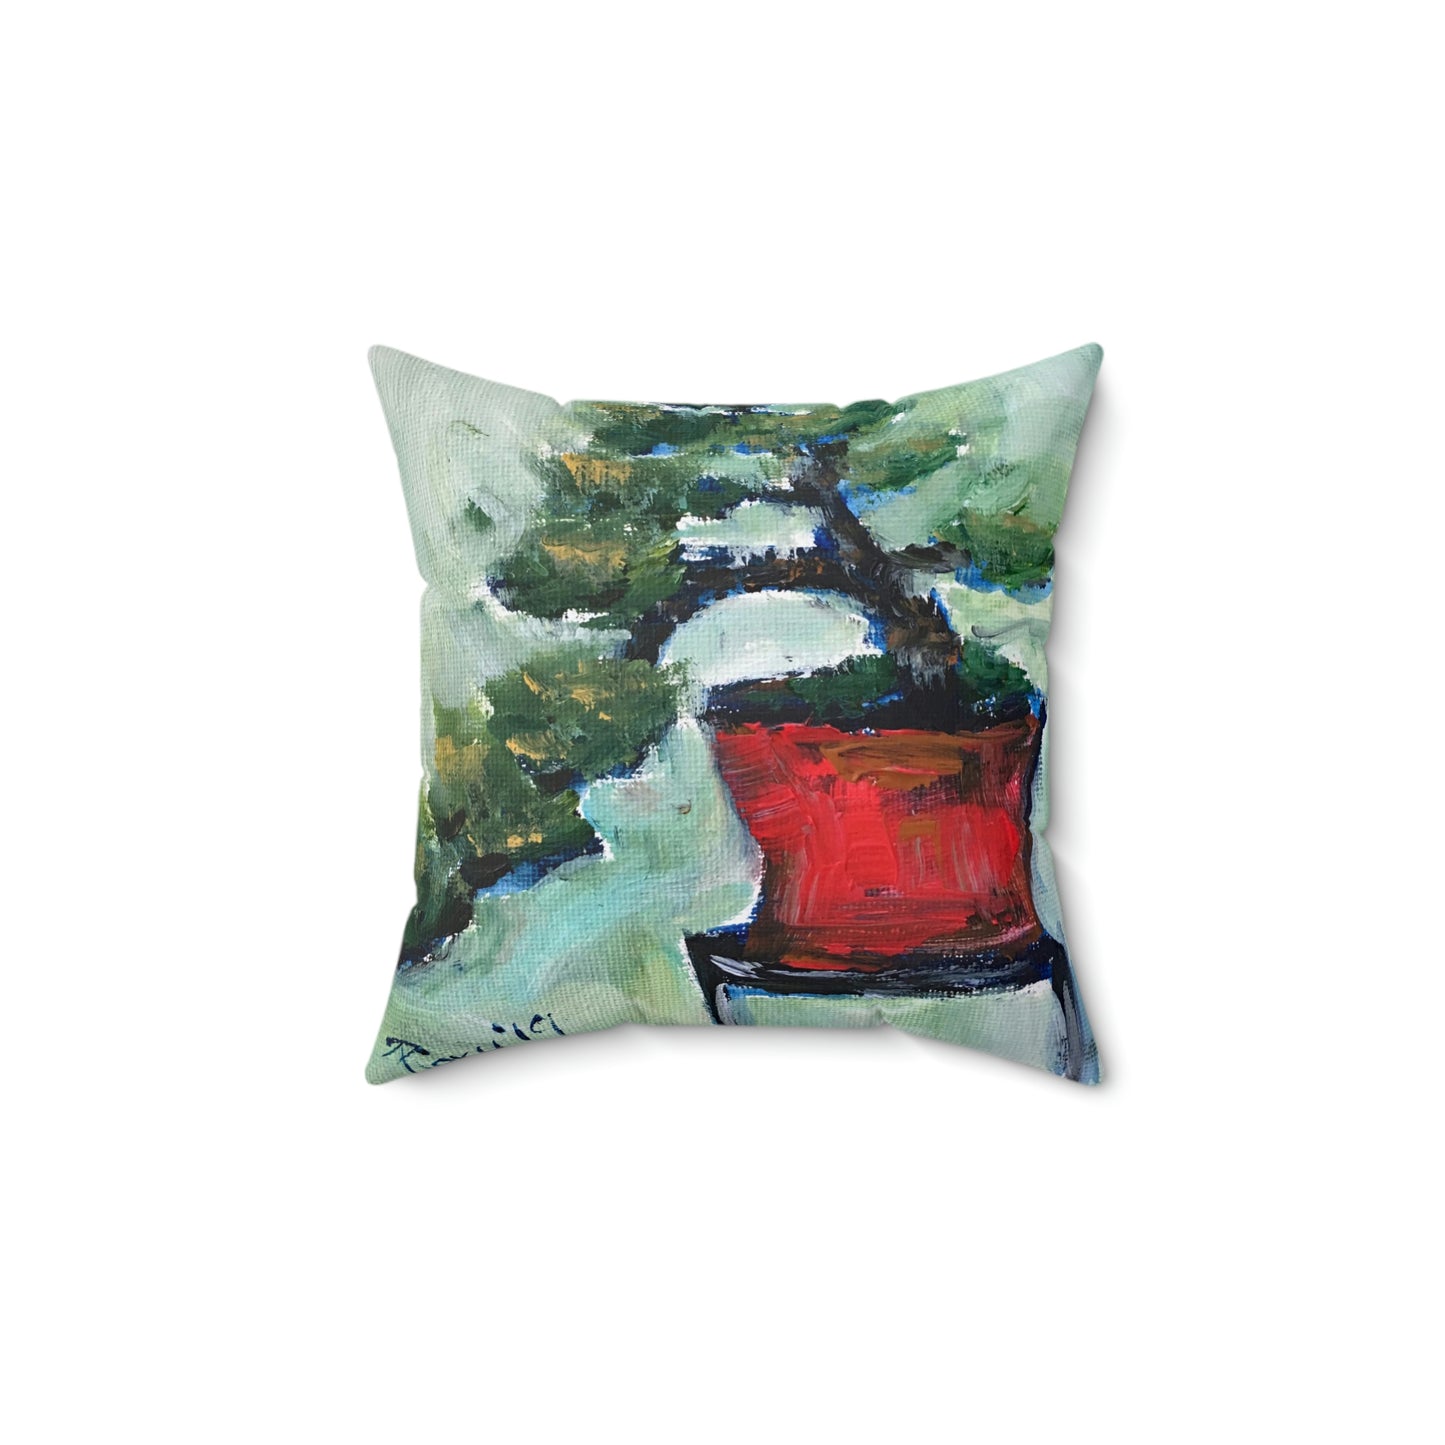 Bonsai in a Red Pot Indoor Spun Polyester Square Pillow